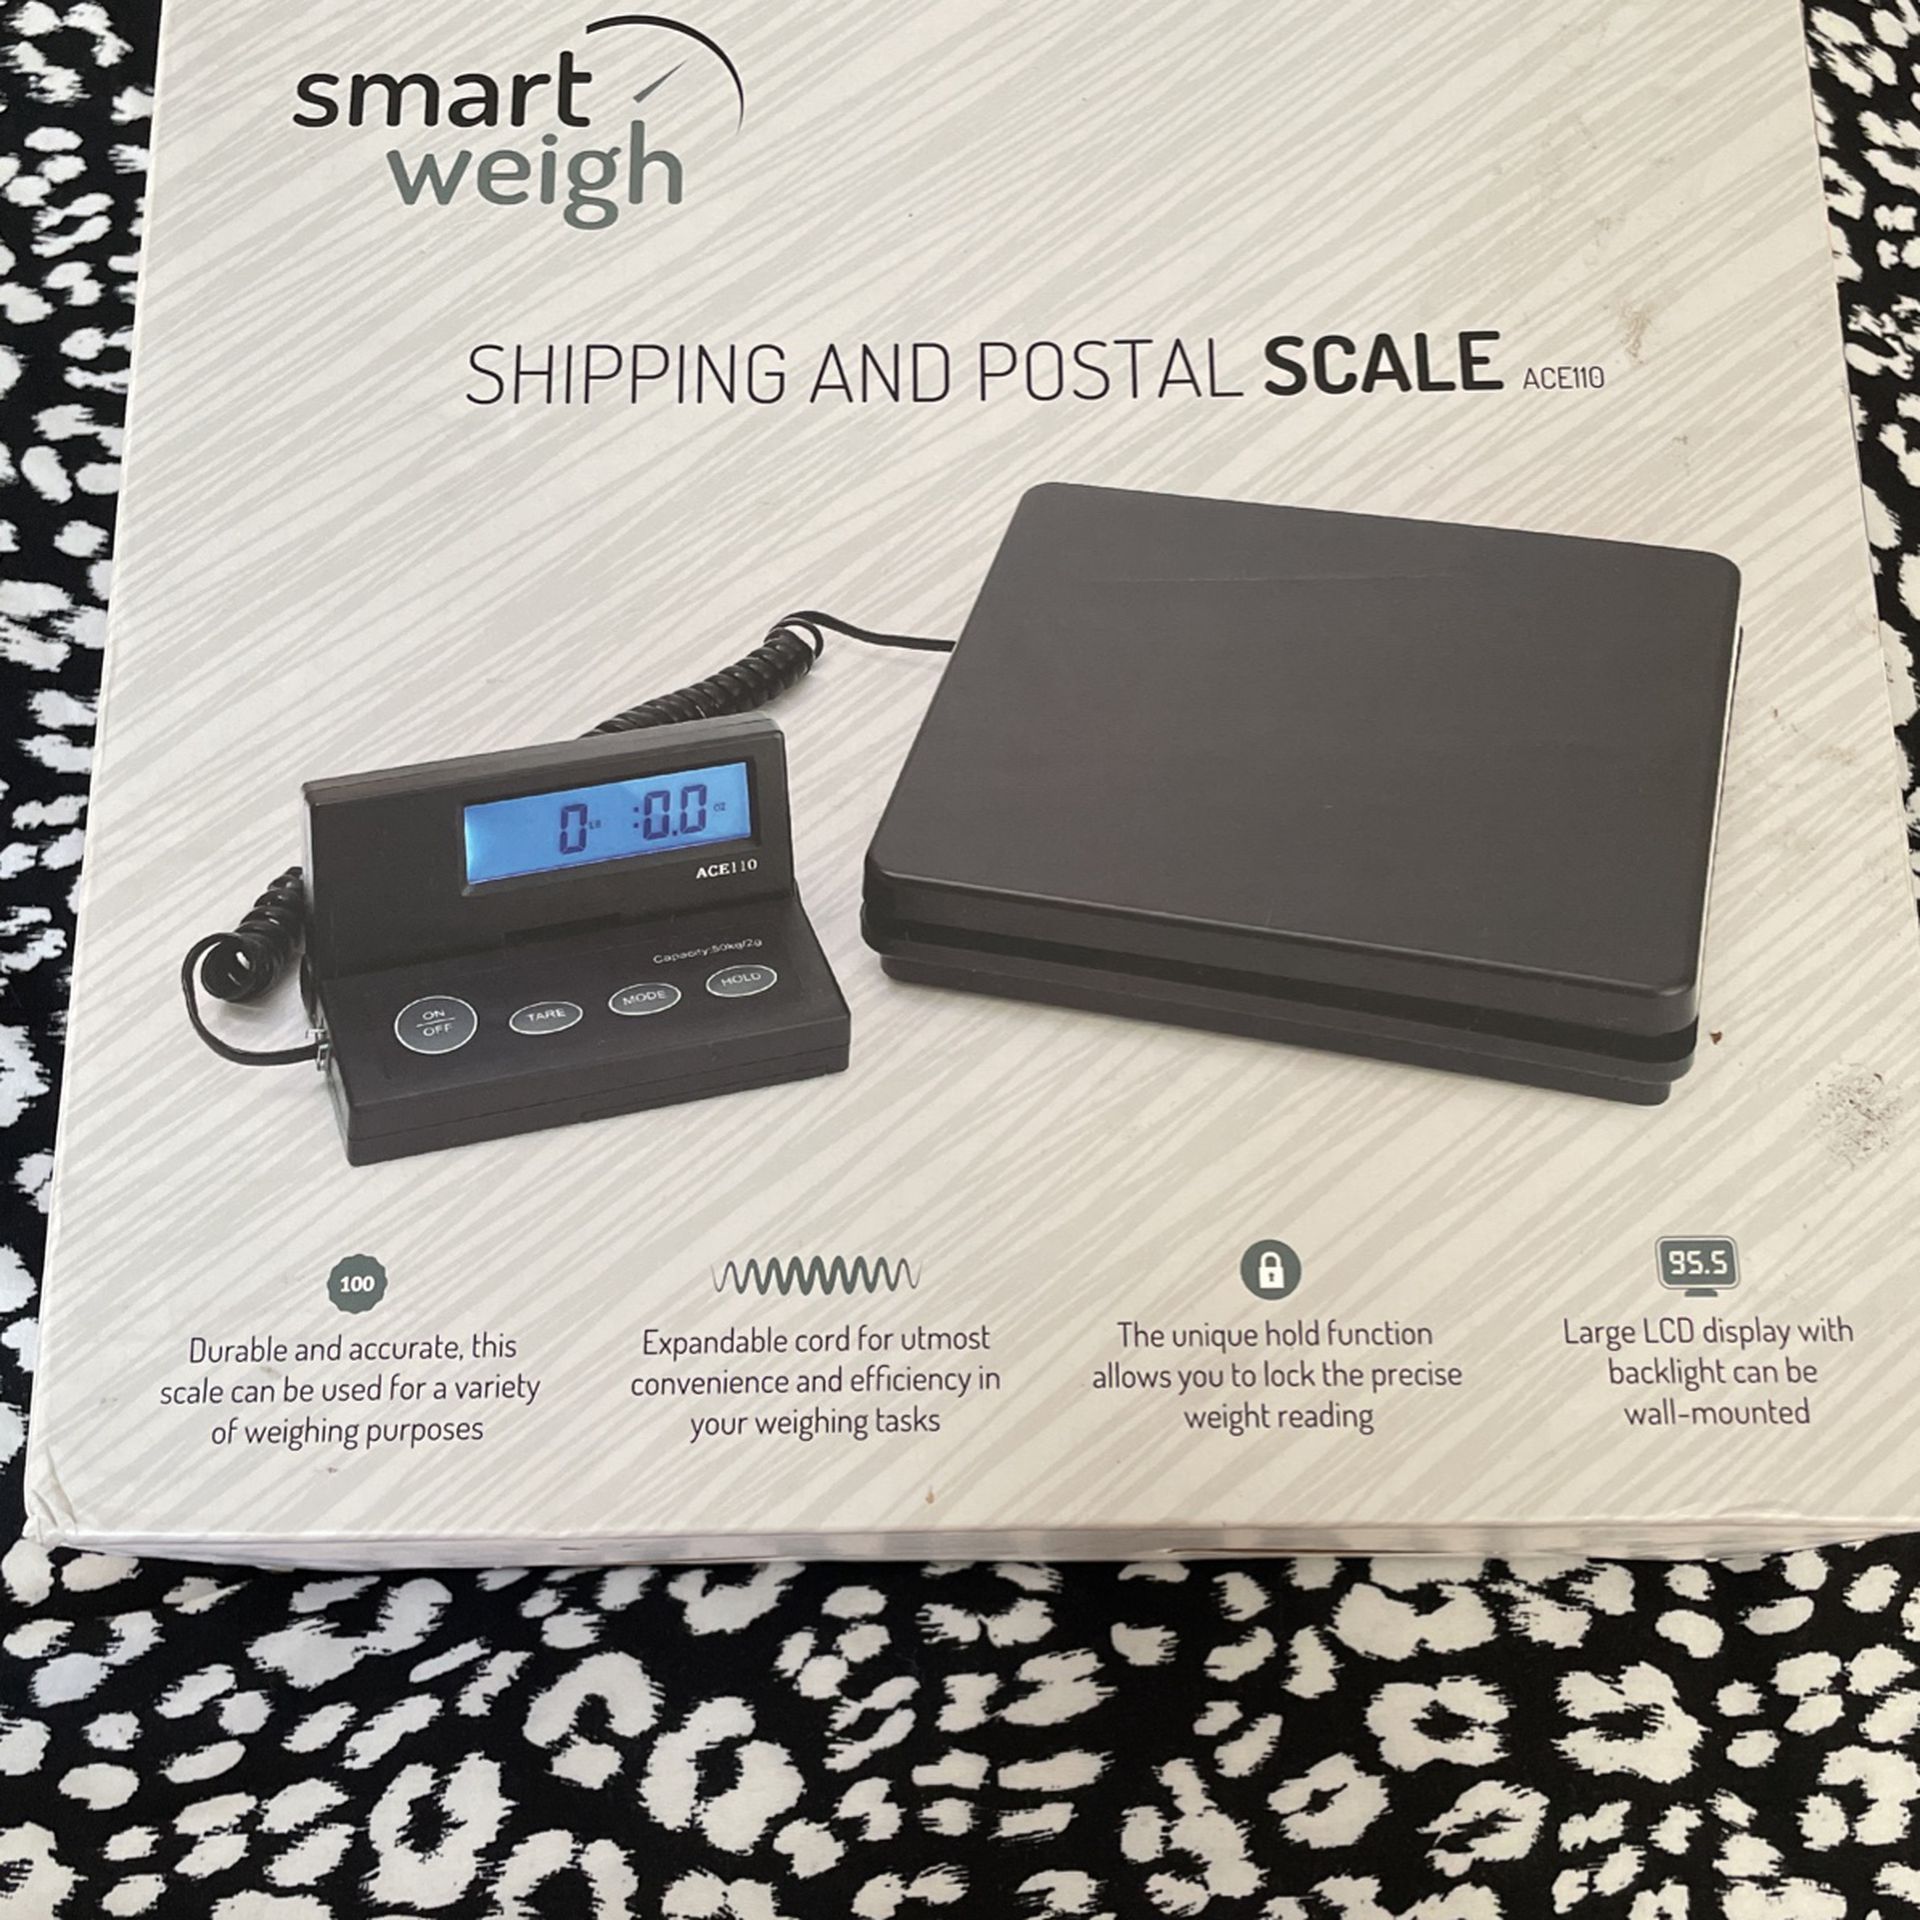 Shipping and postal Scale